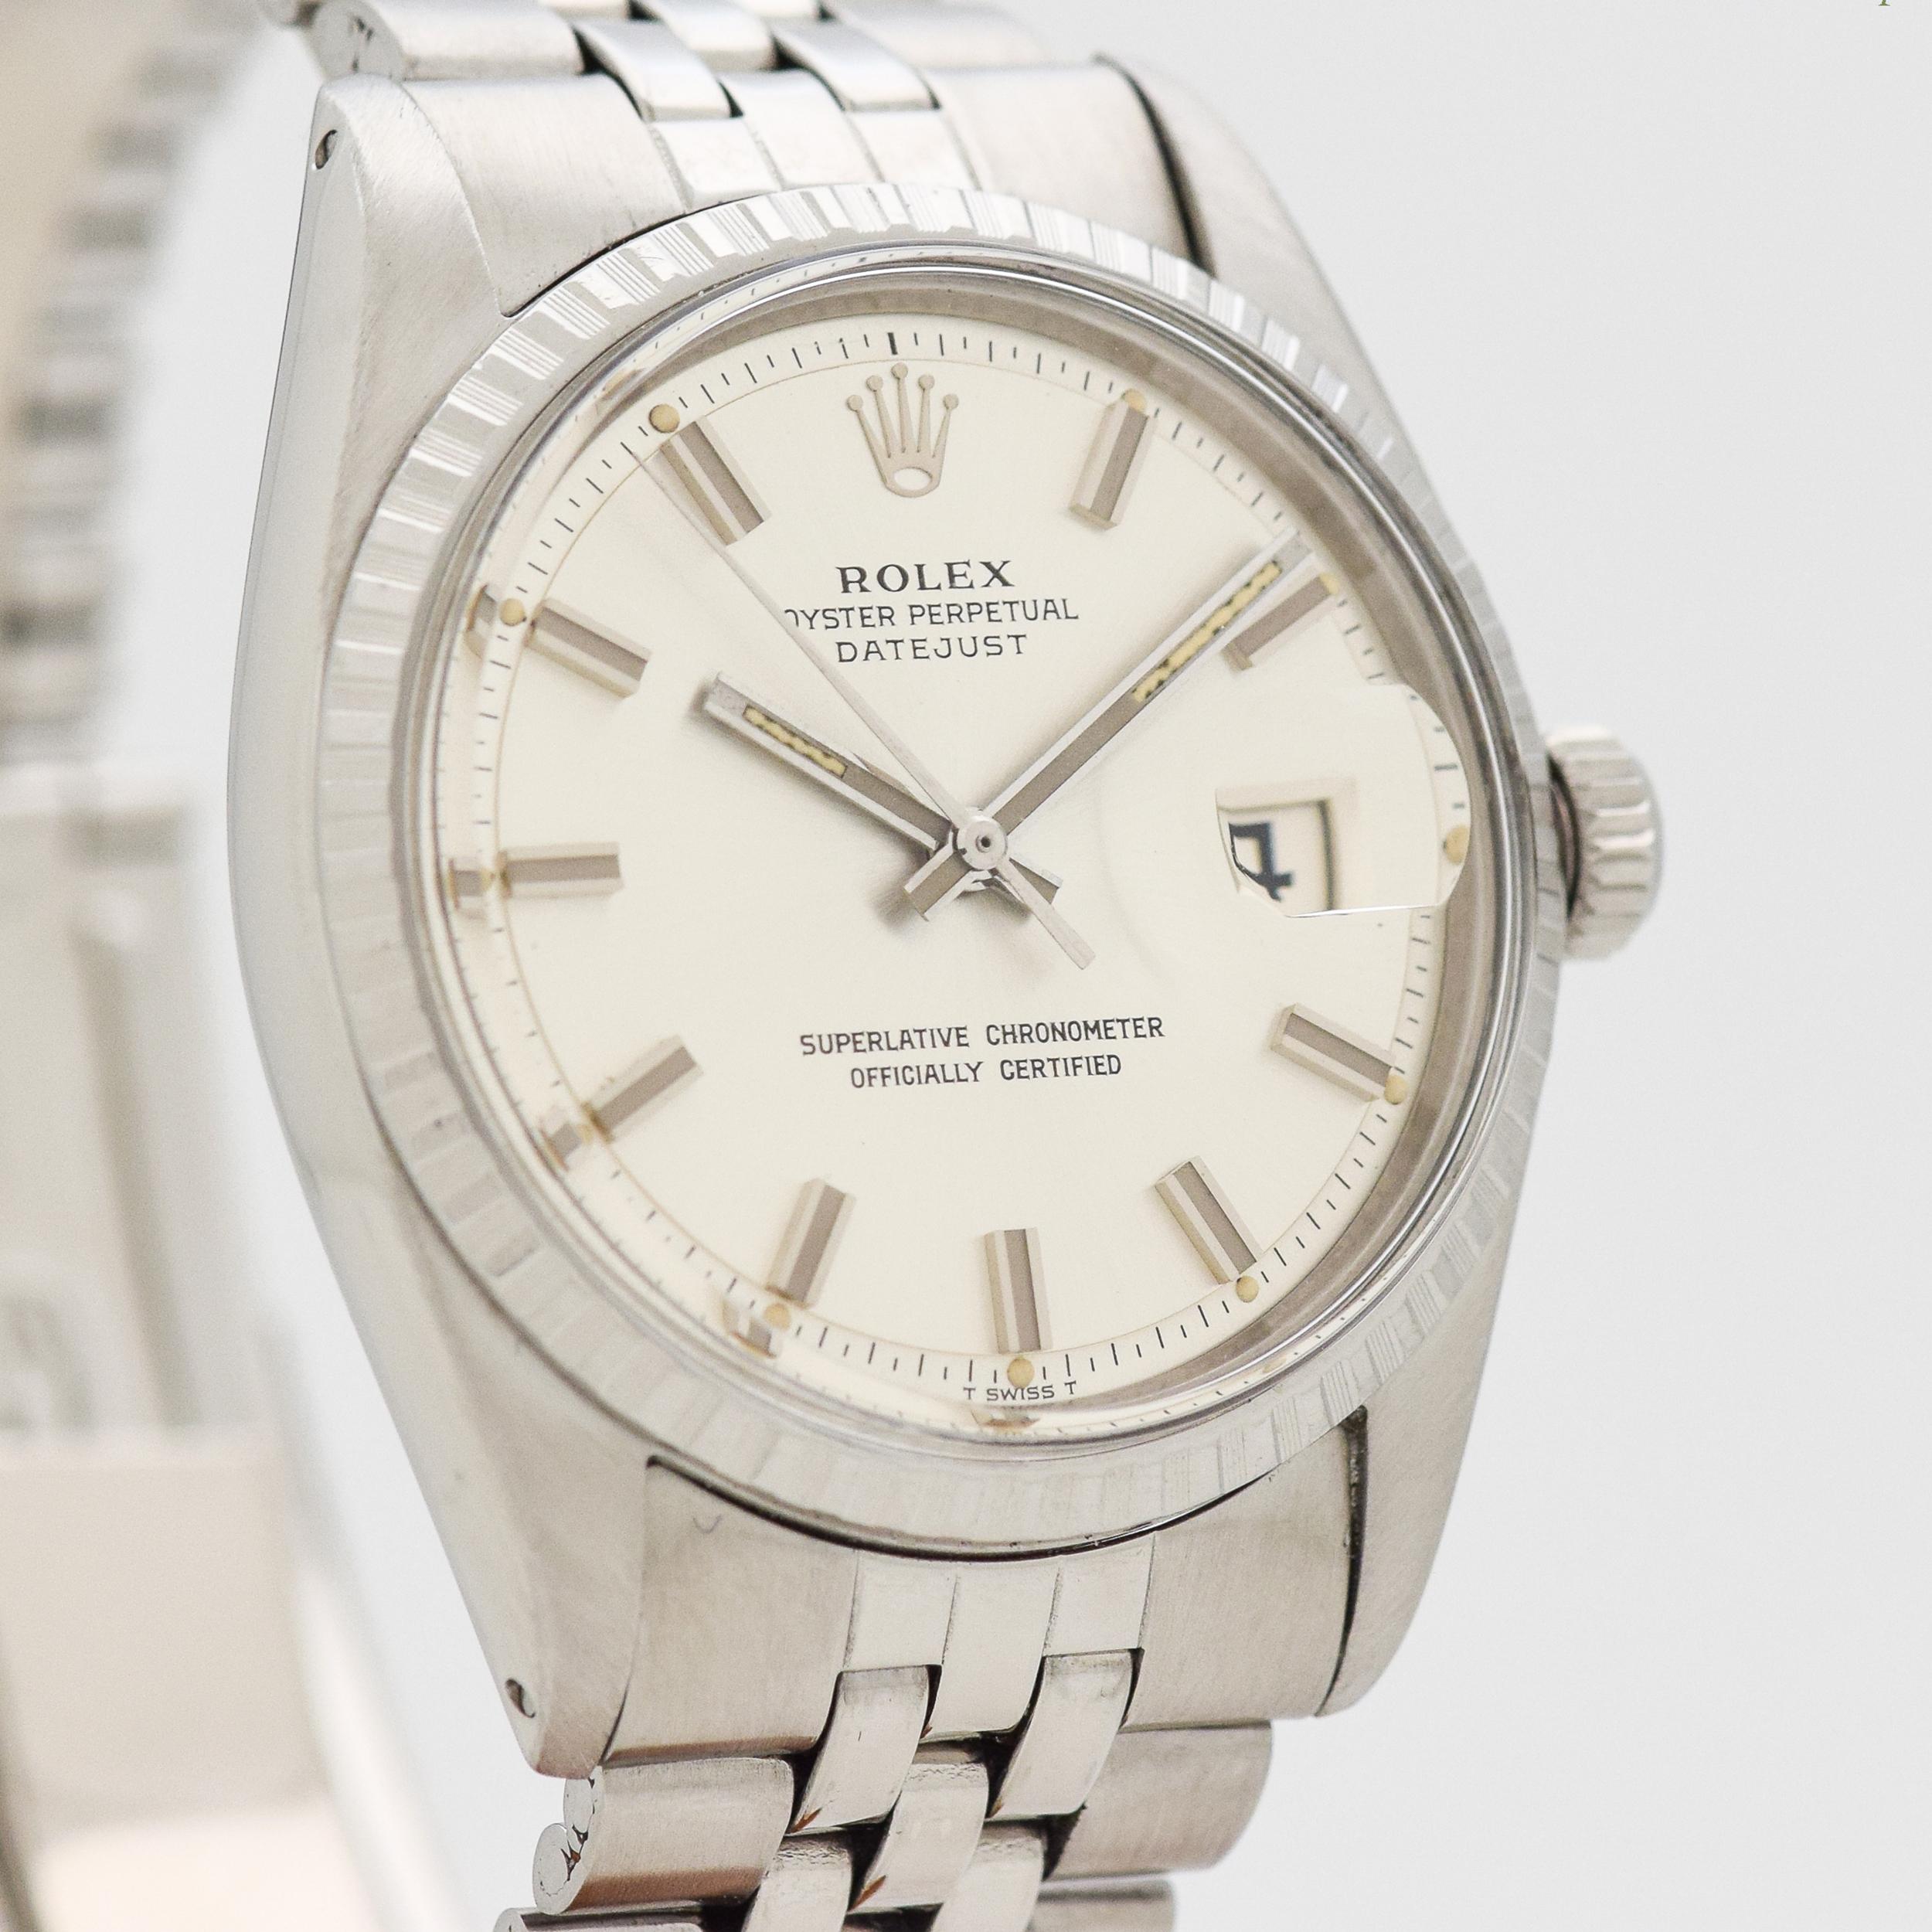 1970 Vintage Rolex Datejust Ref. 1603 Fluted Bezel Stainless Steel Watch with Original Wide Boy Silver Dial with Wide Stick/Bar/Baton Markers with Original Rolex Stainless Steel Jubilee Bracelet. 36mm x 43mm lug to lug (1.42 in. x 1.69 in.) - 26